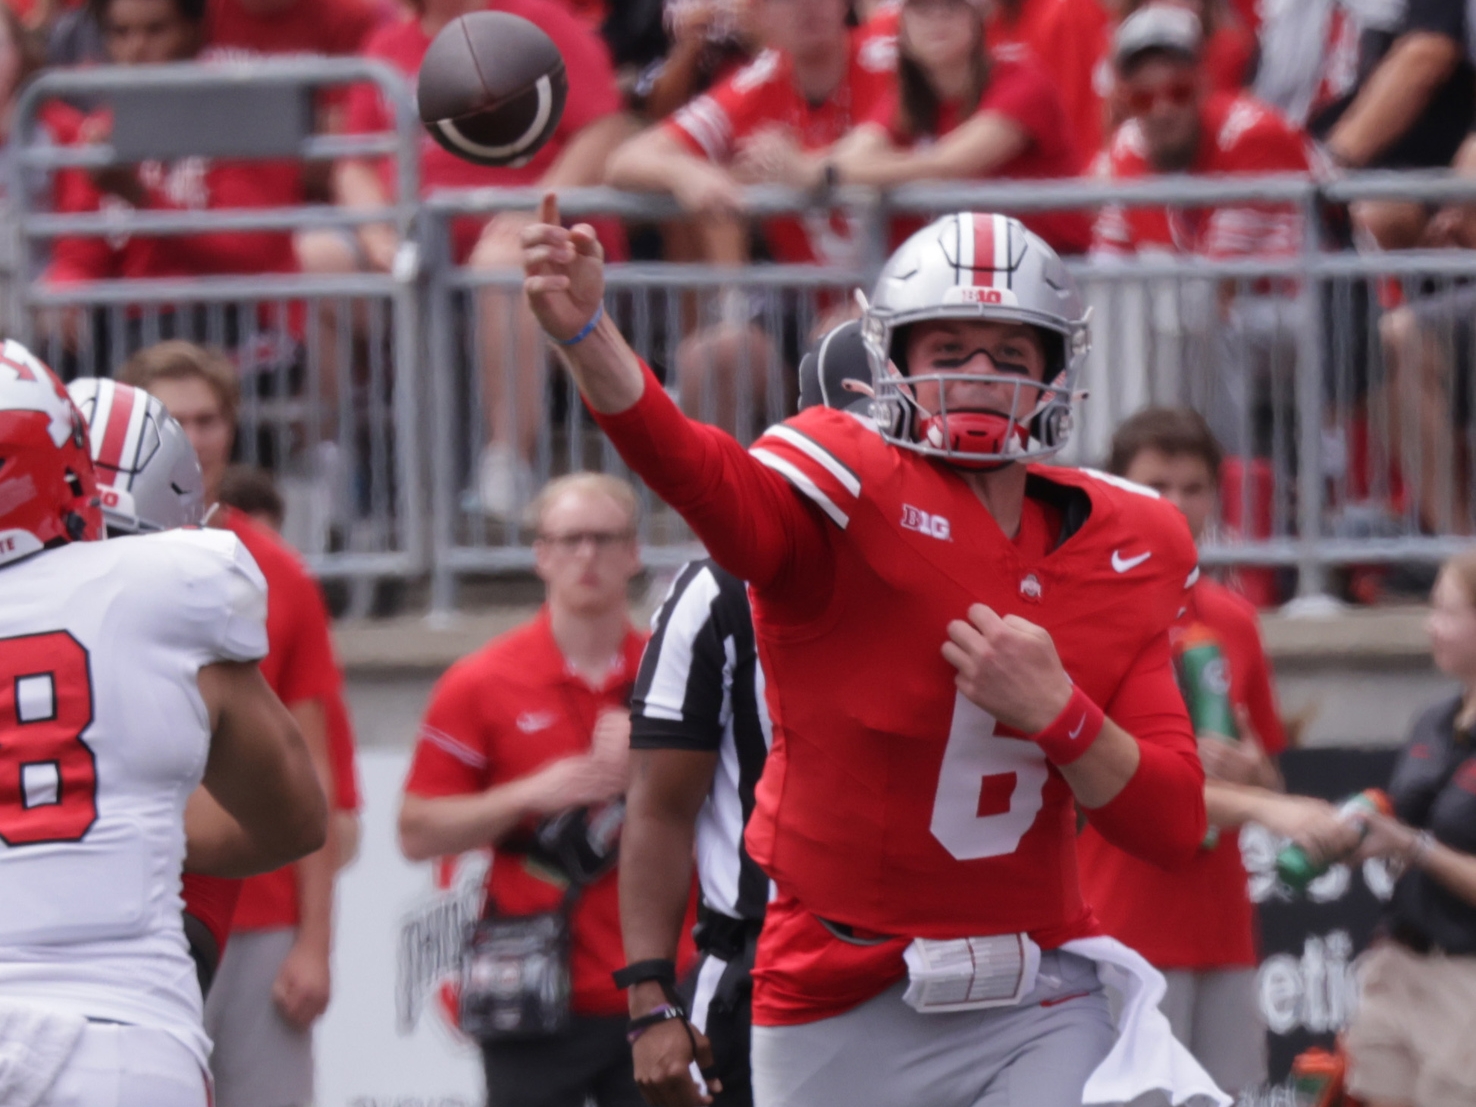 Ohio State QB Kyle McCord proves his mettle in win vs. Notre Dame